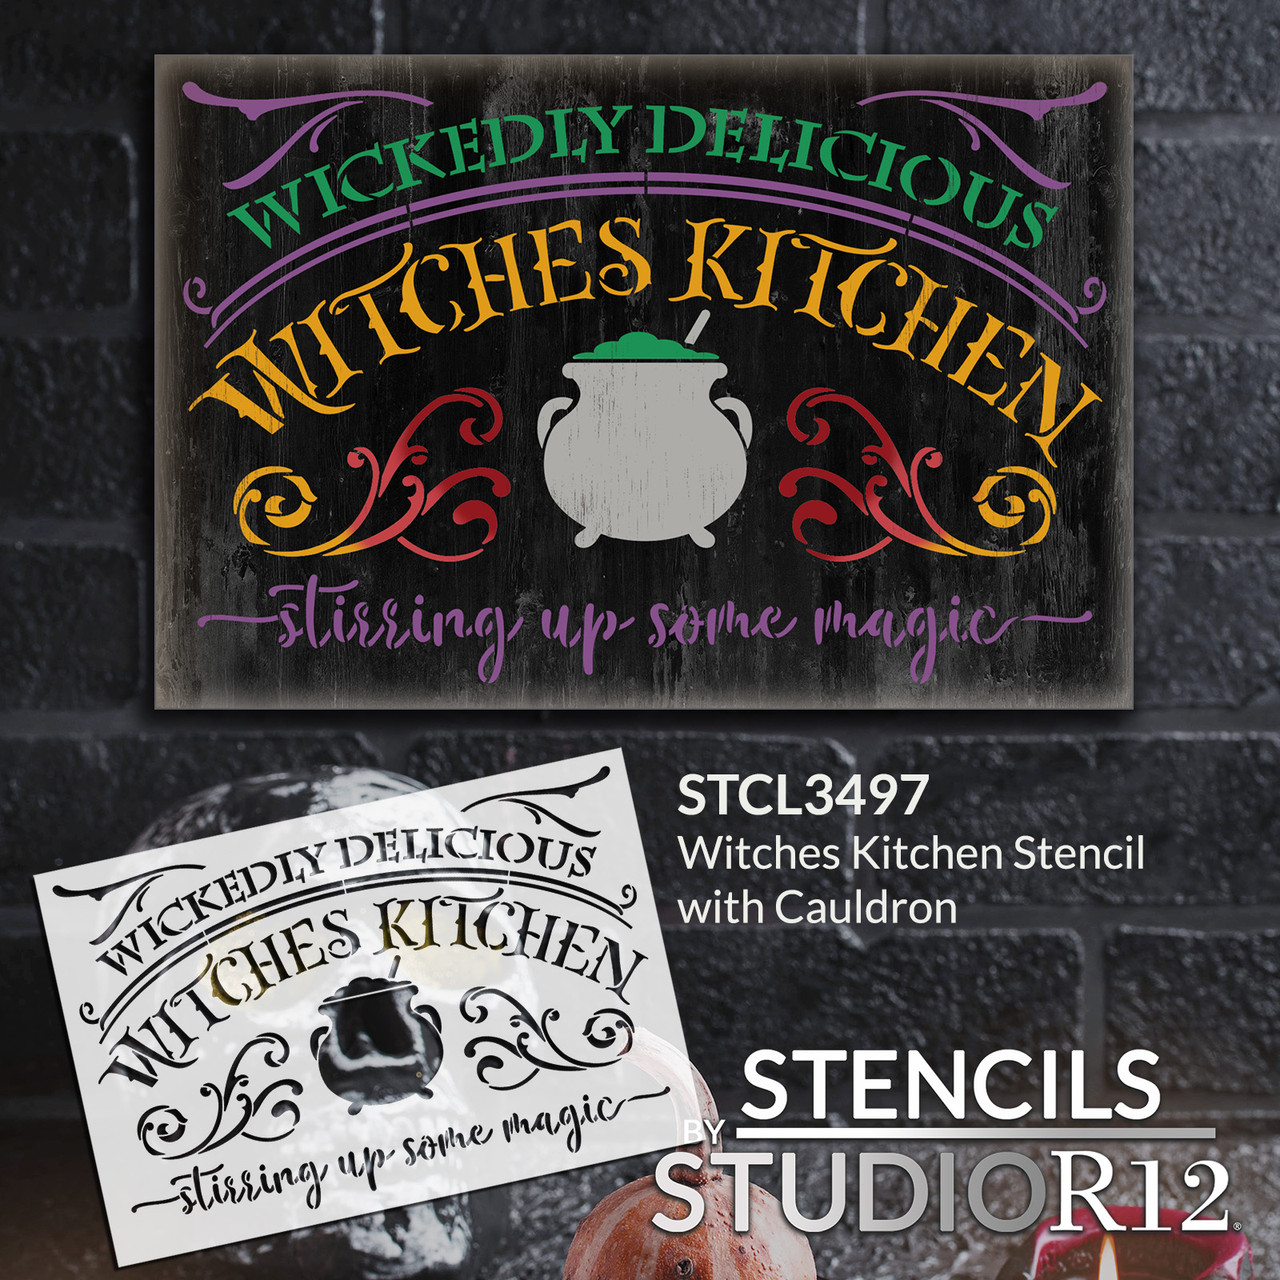 Witches Kitchen Stencil with Cauldron by StudioR12 | DIY Halloween Home Decor | Paint Fall & Autumn Holiday Wood Signs | Select Size